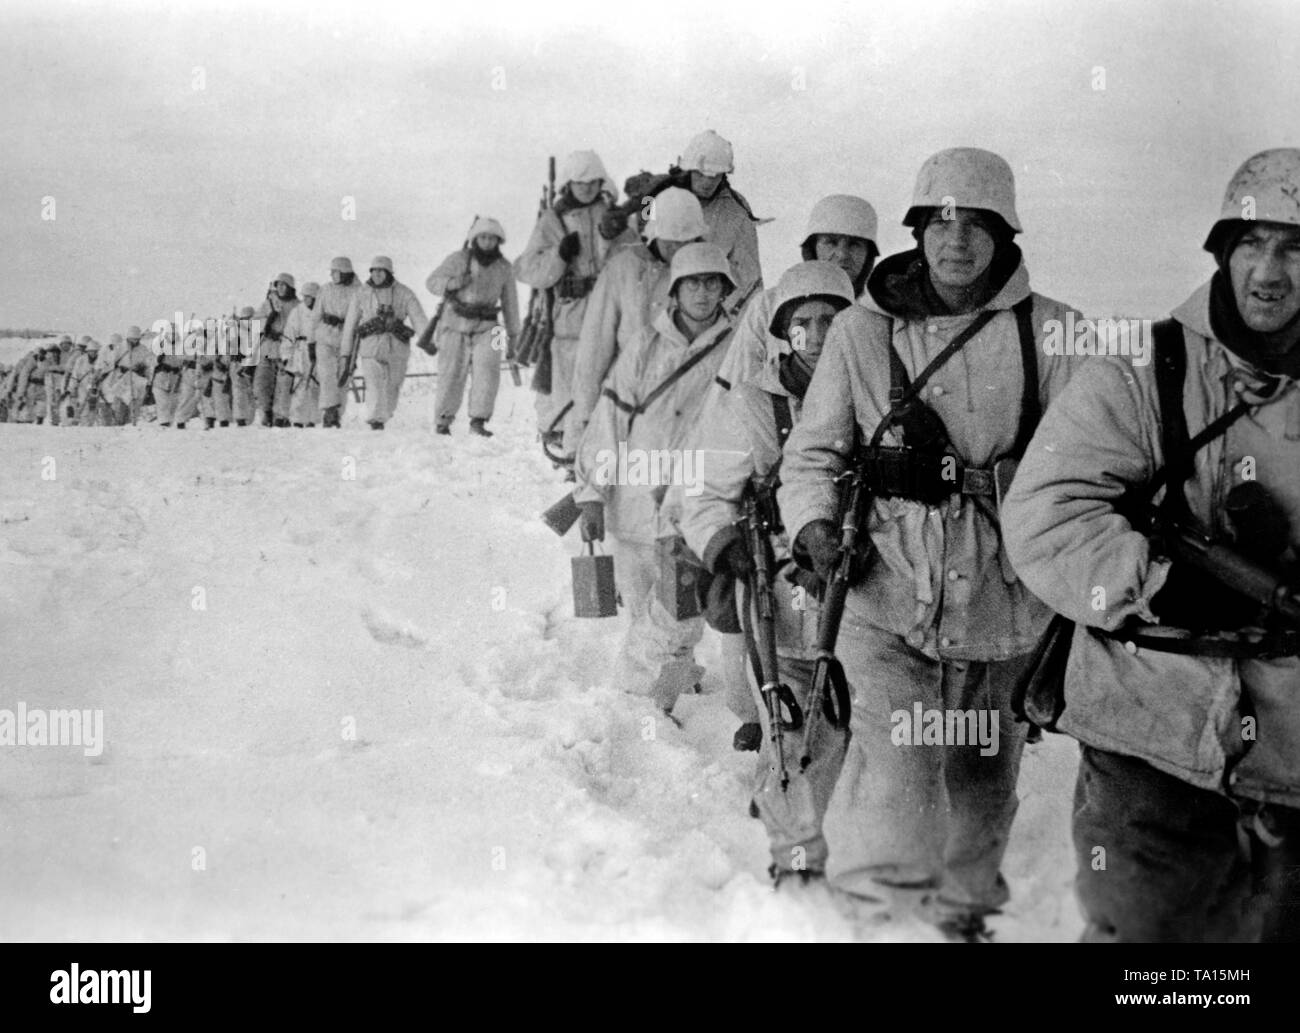 During the winter defensive battles on the Eastern Front, German soldiers march across a snow-covered field. Photo of the Propaganda Company (PK): war correspondent Wacker. Stock Photo